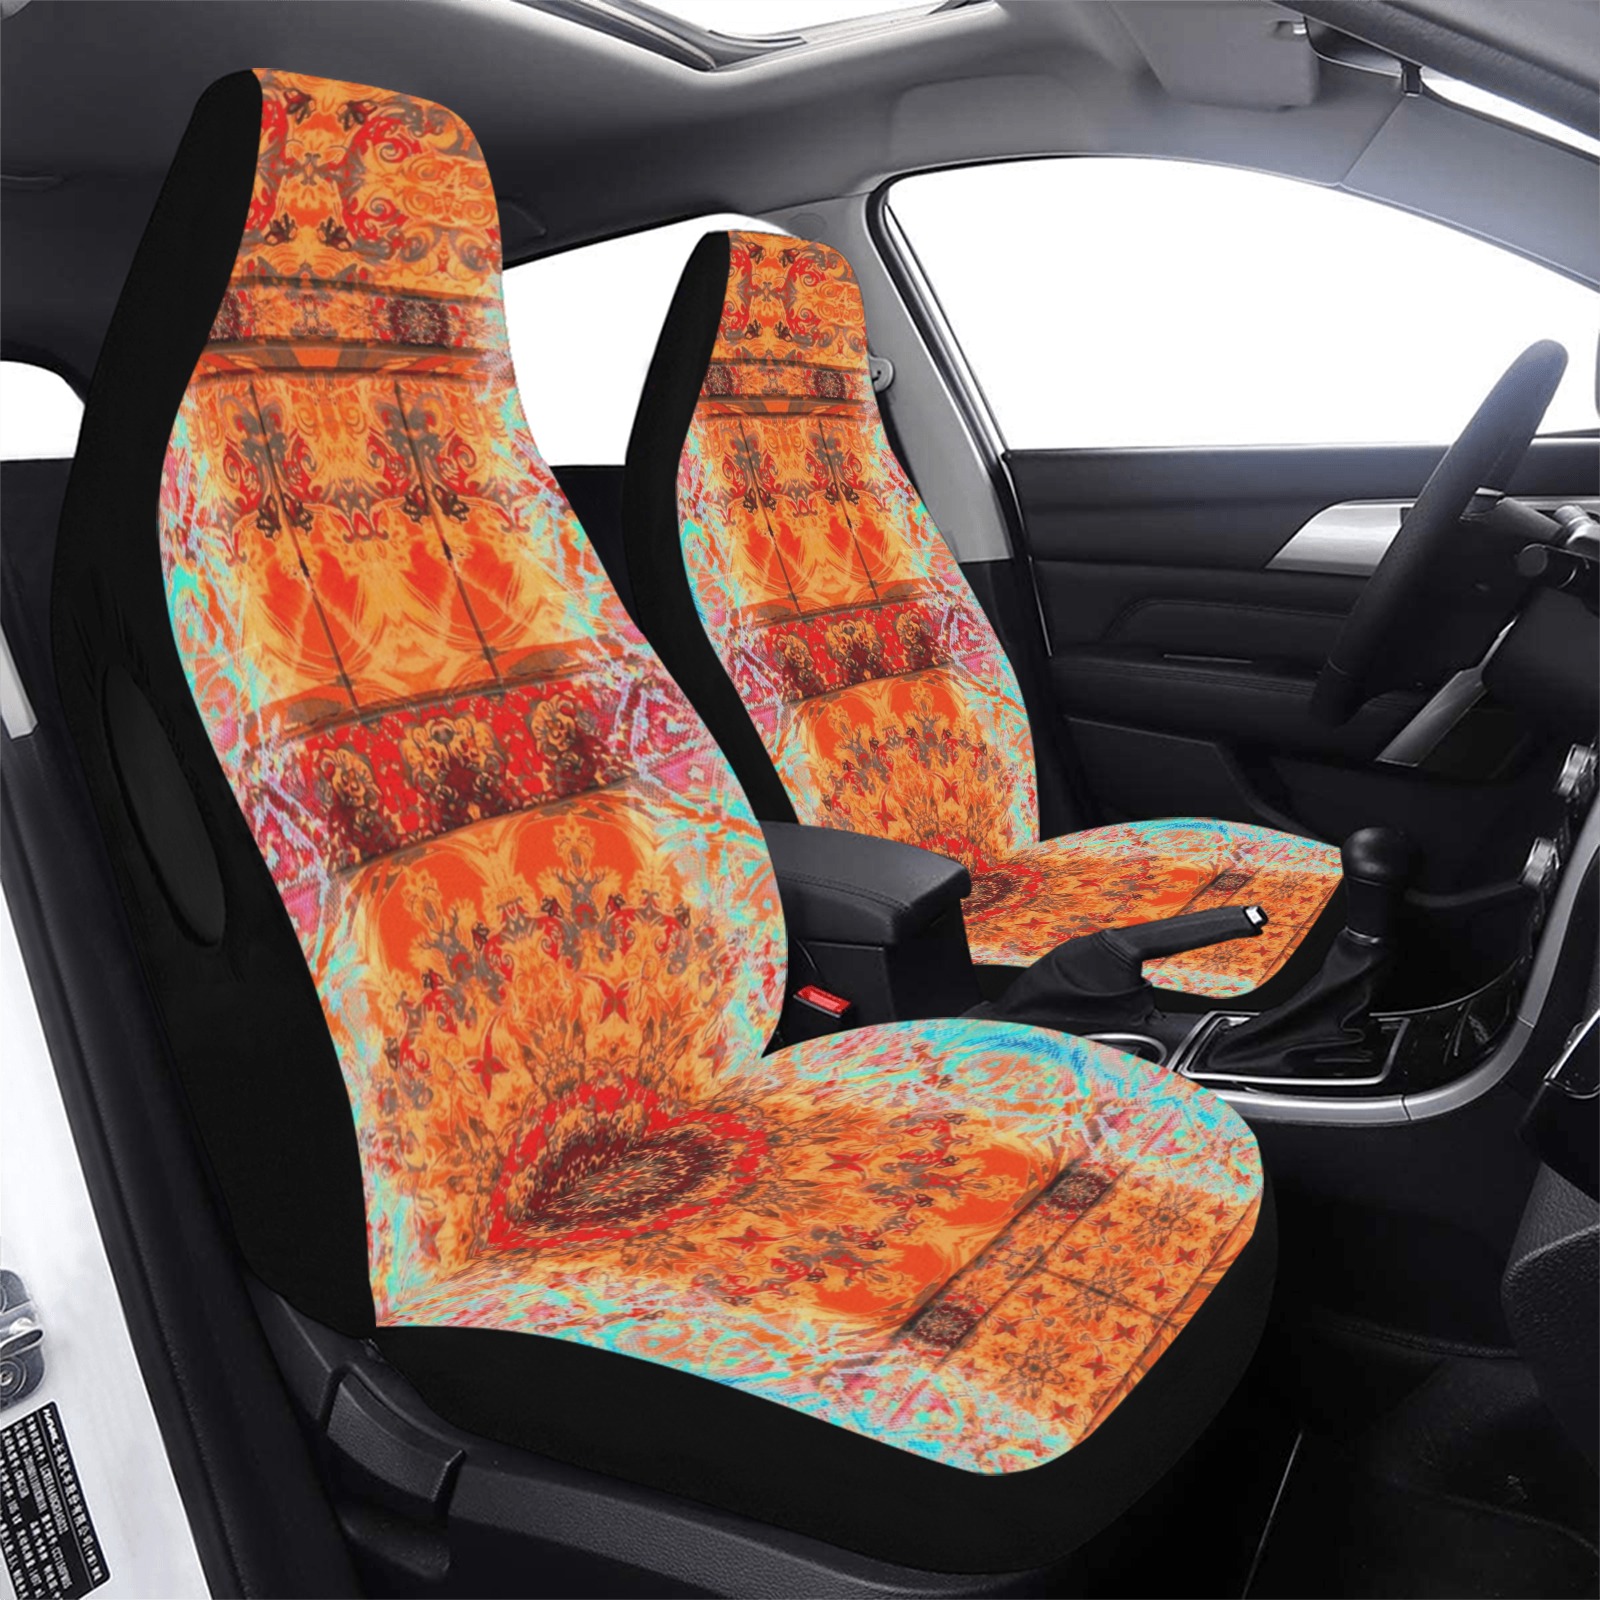 orange 3 Car Seat Cover Airbag Compatible (Set of 2)